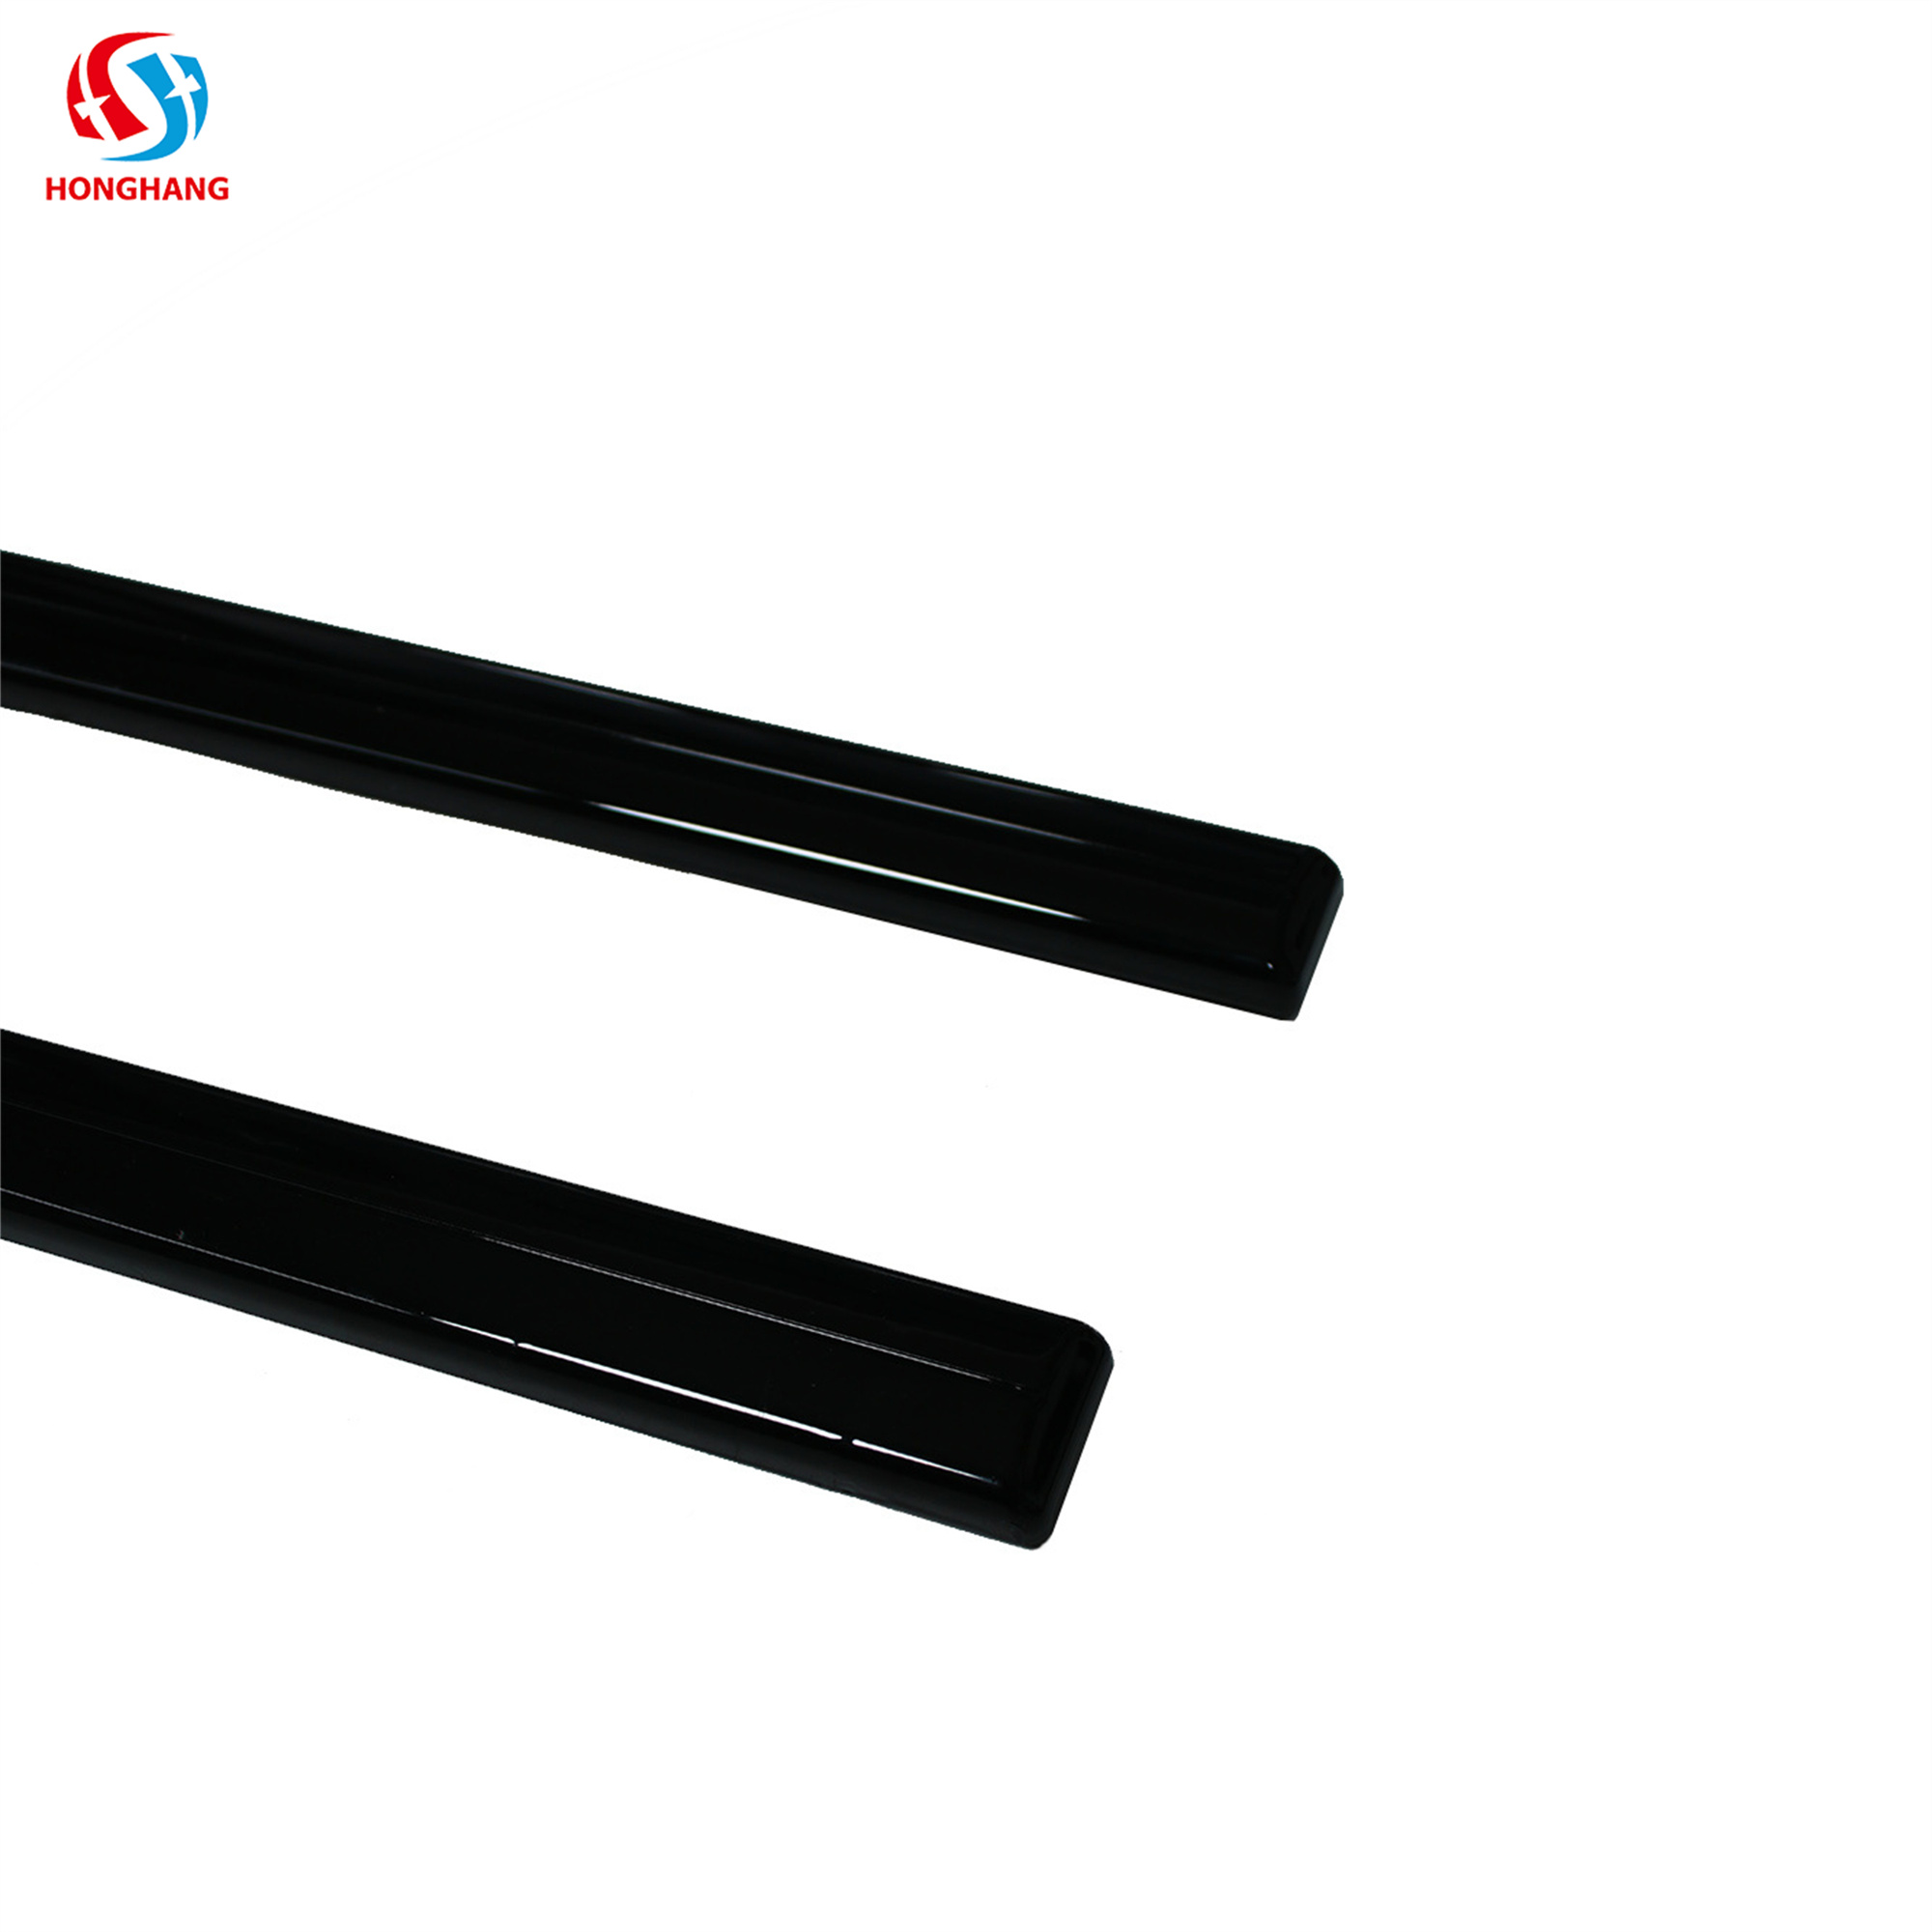 Universal Side Body Anti-collision Trims For All Cars